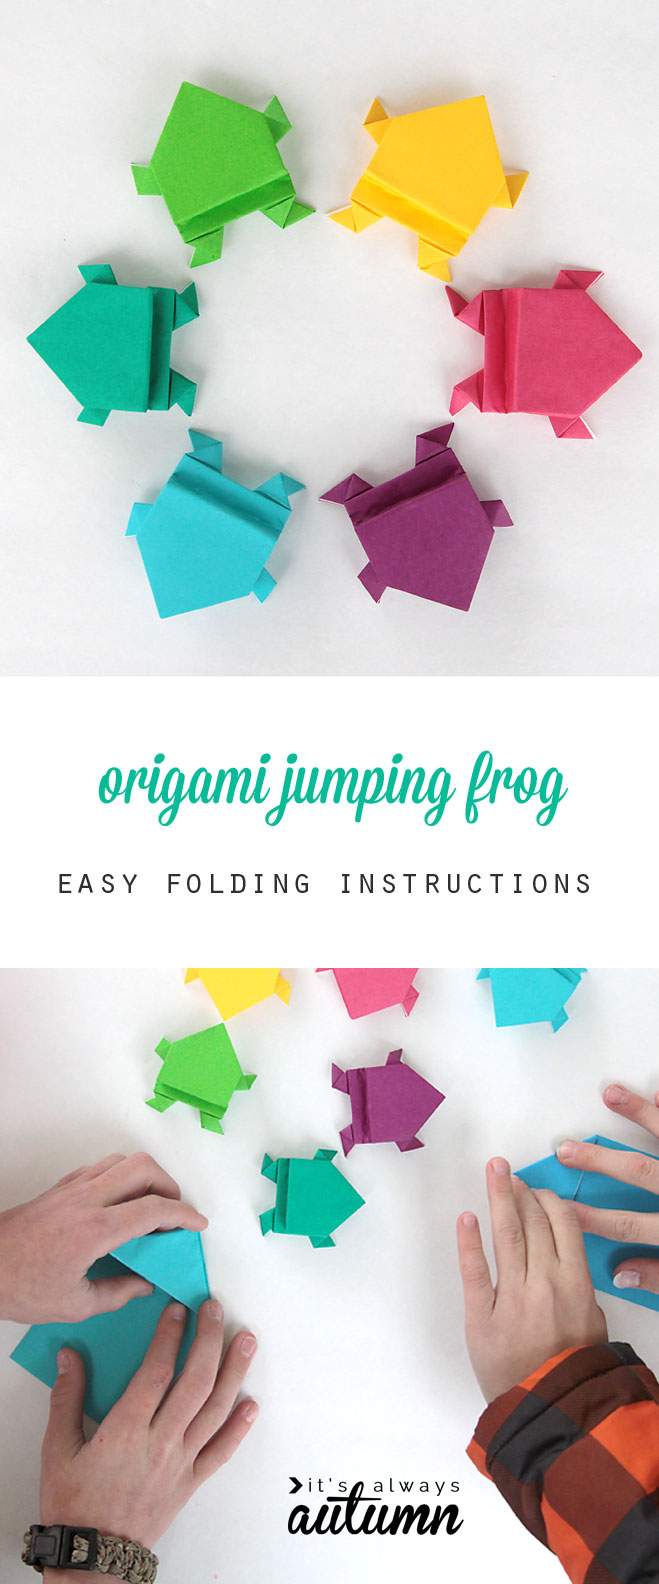 nice photo instructions show how to hold an origami jumping frog. looks easy enough for kids!